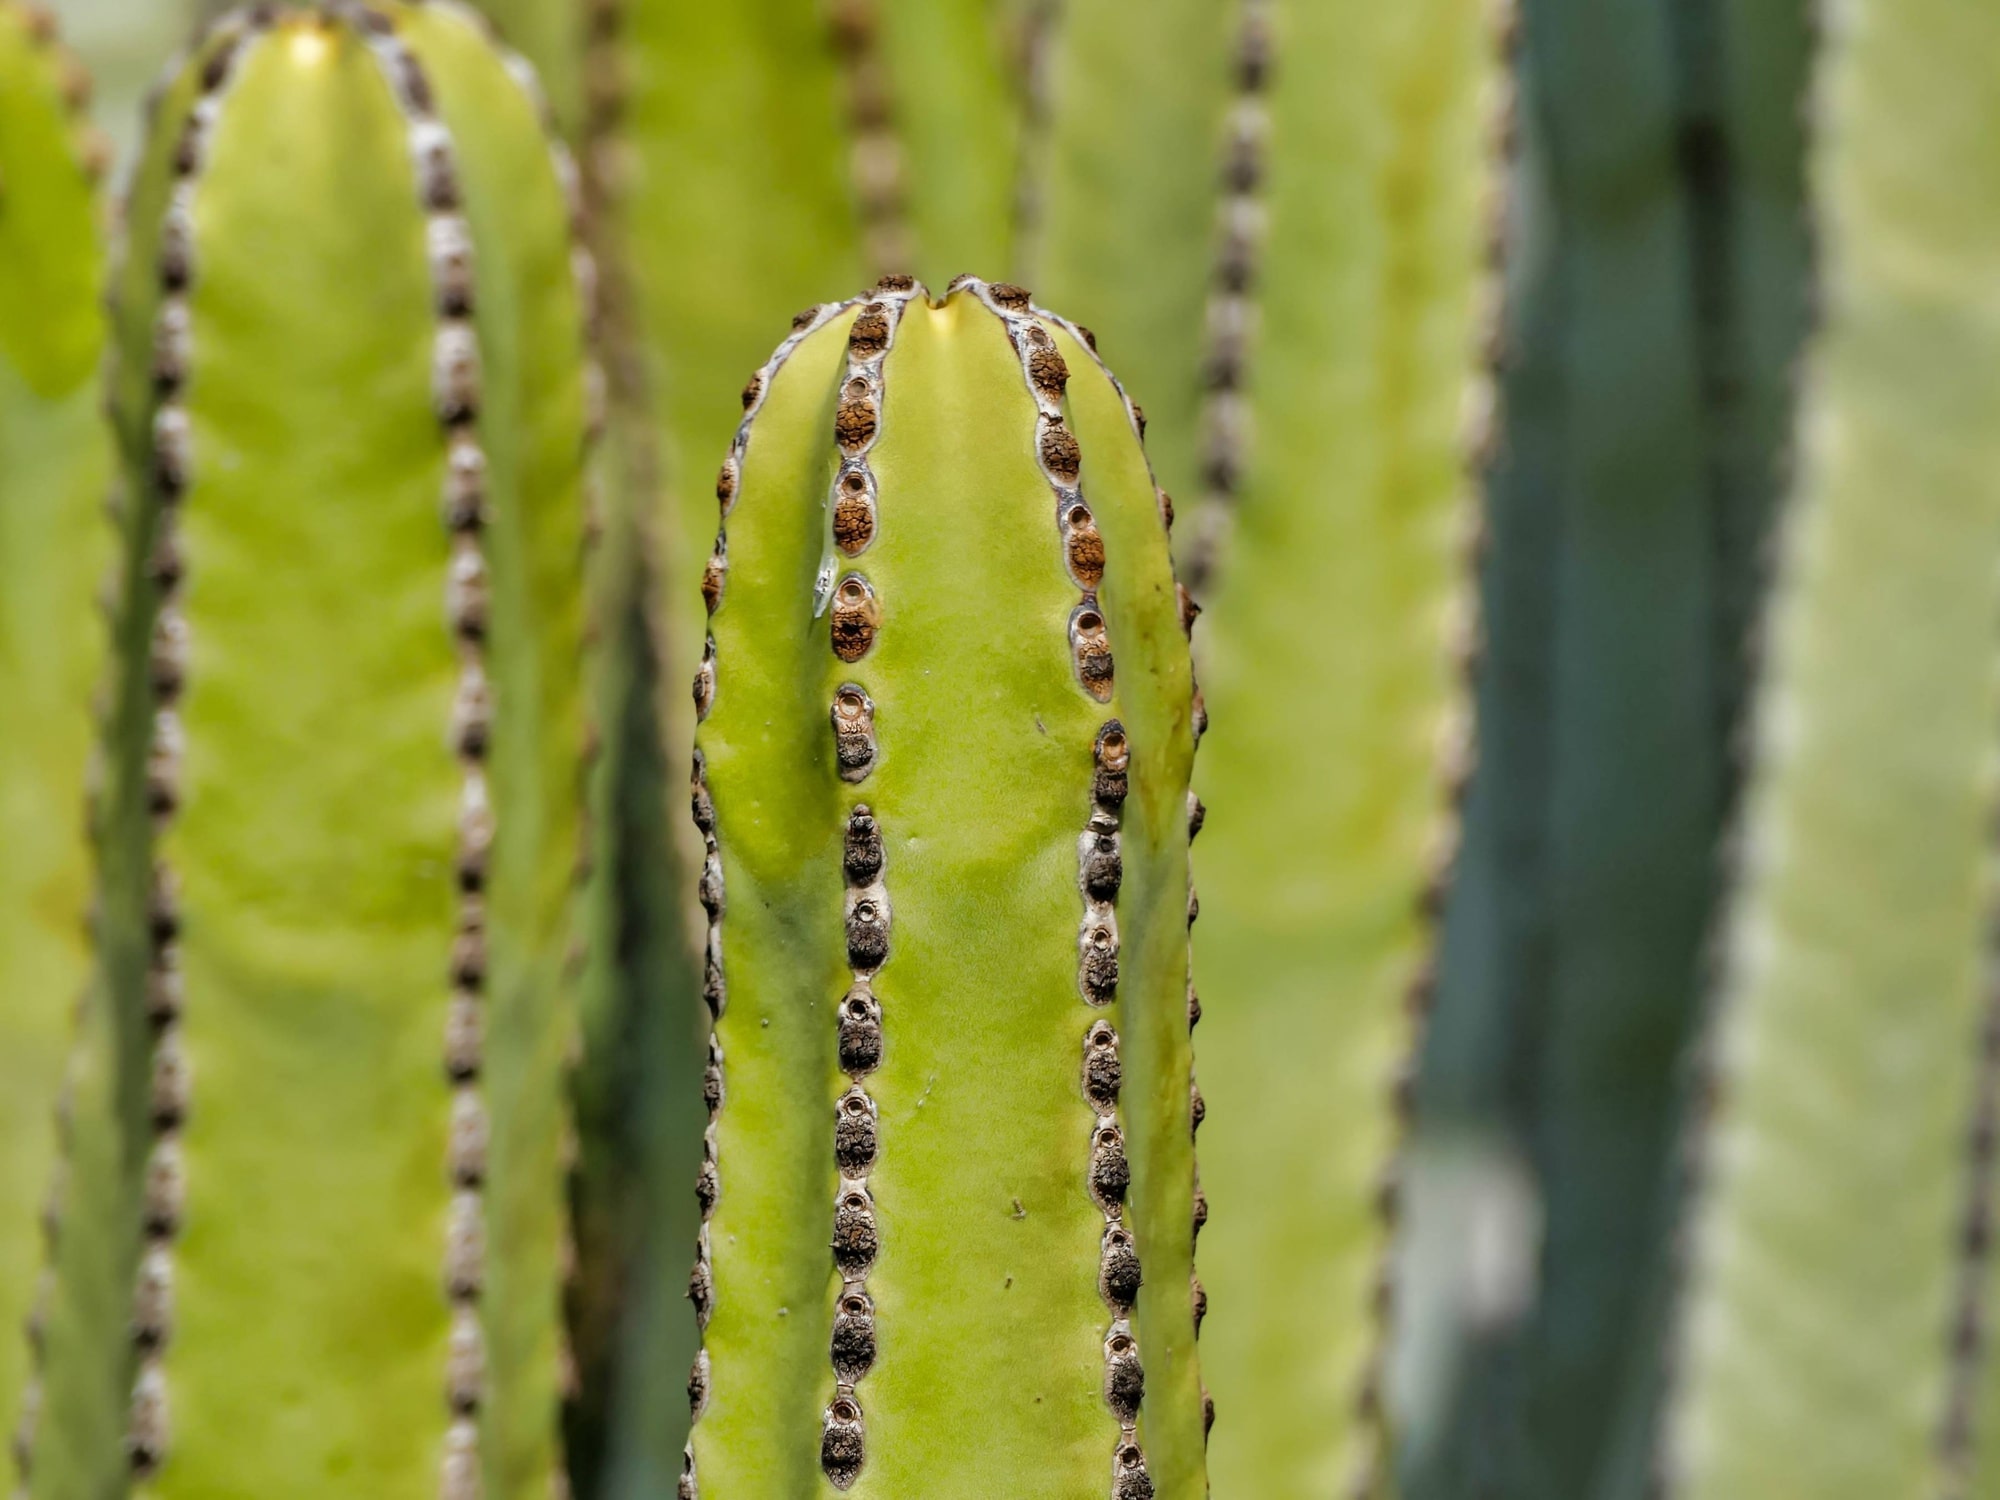 This is how you grow your own mescaline cacti!